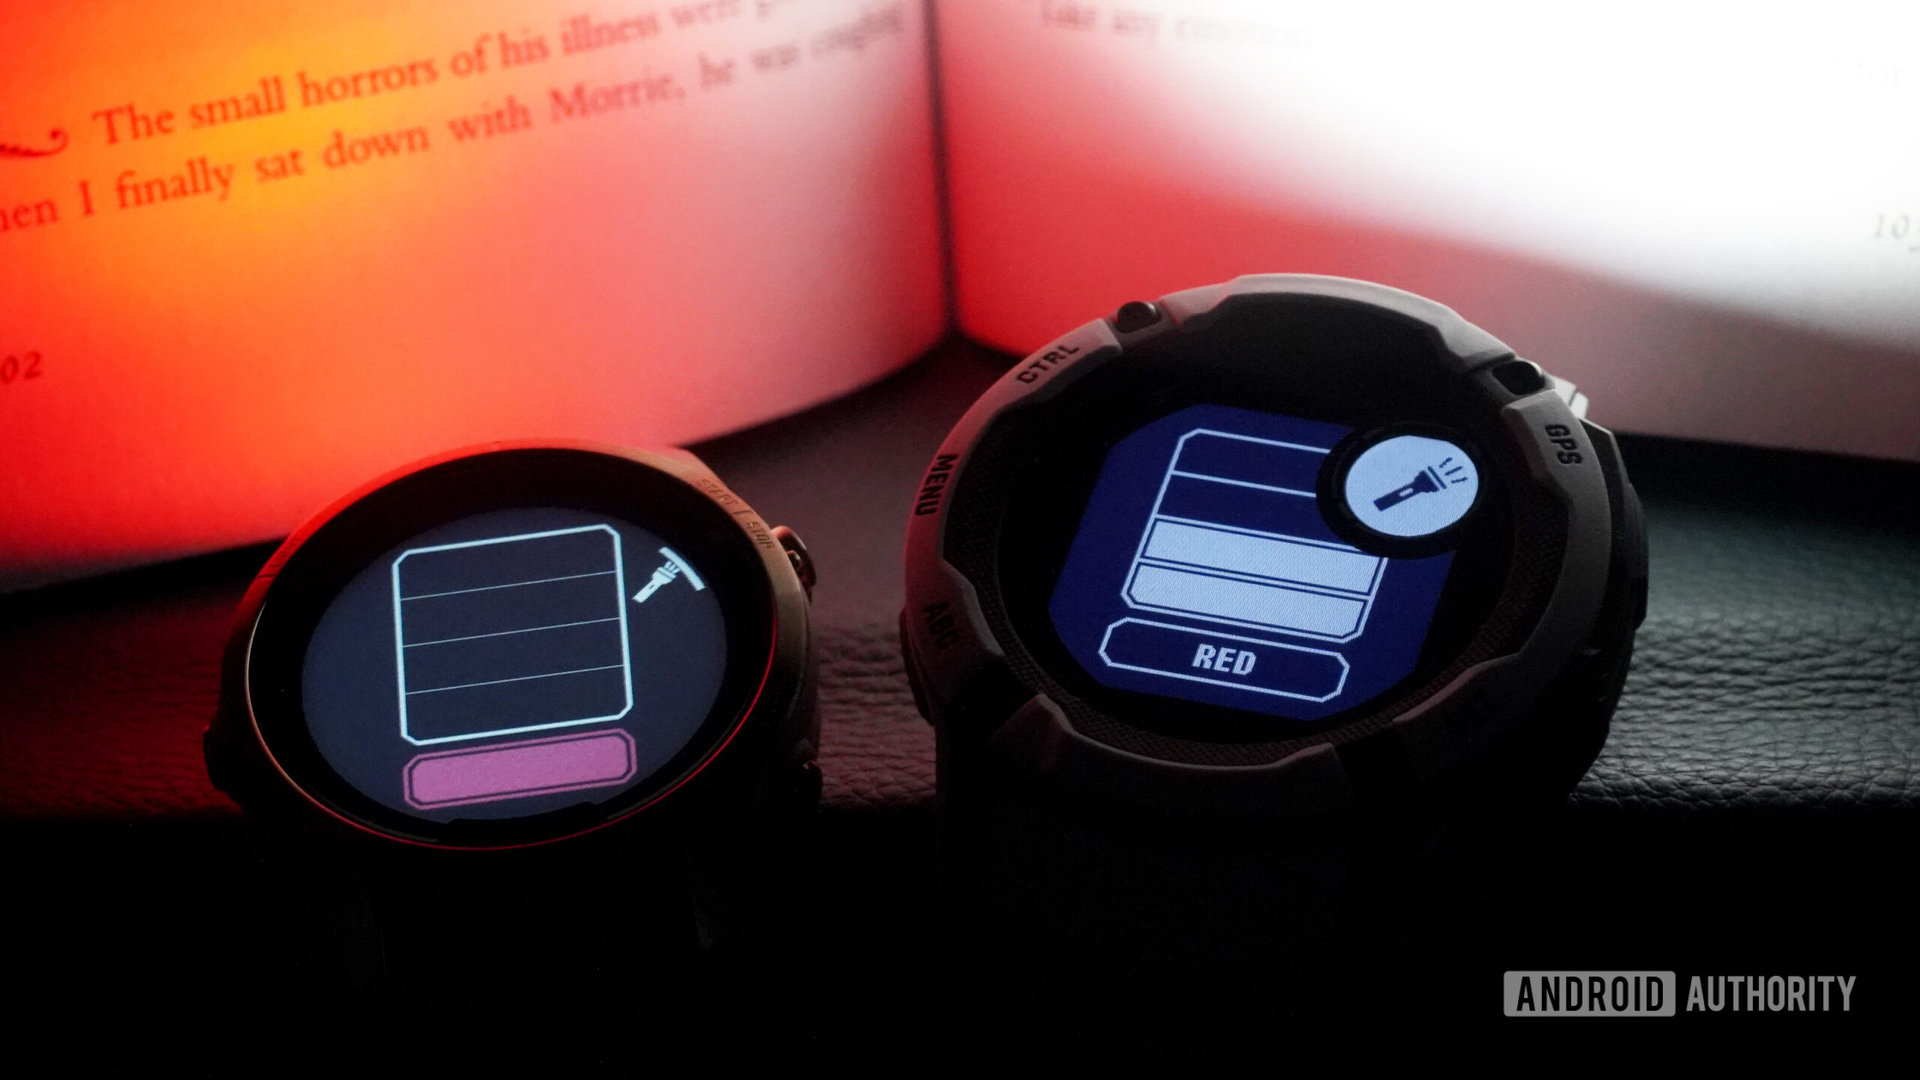 Two Garmin devices illuminate a book at night, one shining a white light and one in red mode.